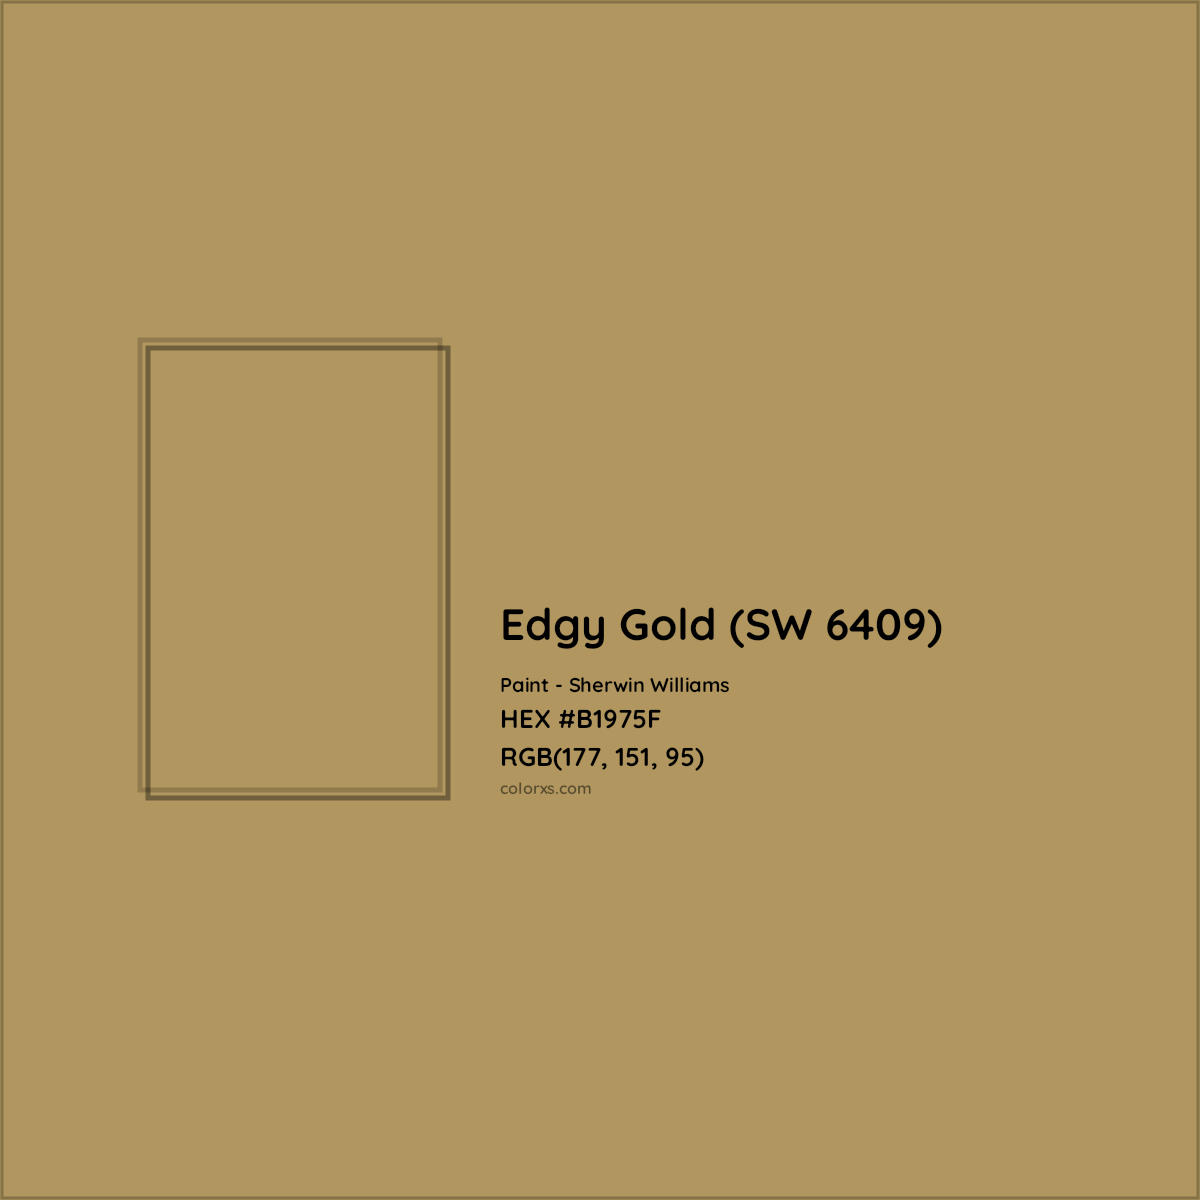 HEX #B1975F Edgy Gold (SW 6409) Paint Sherwin Williams - Color Code